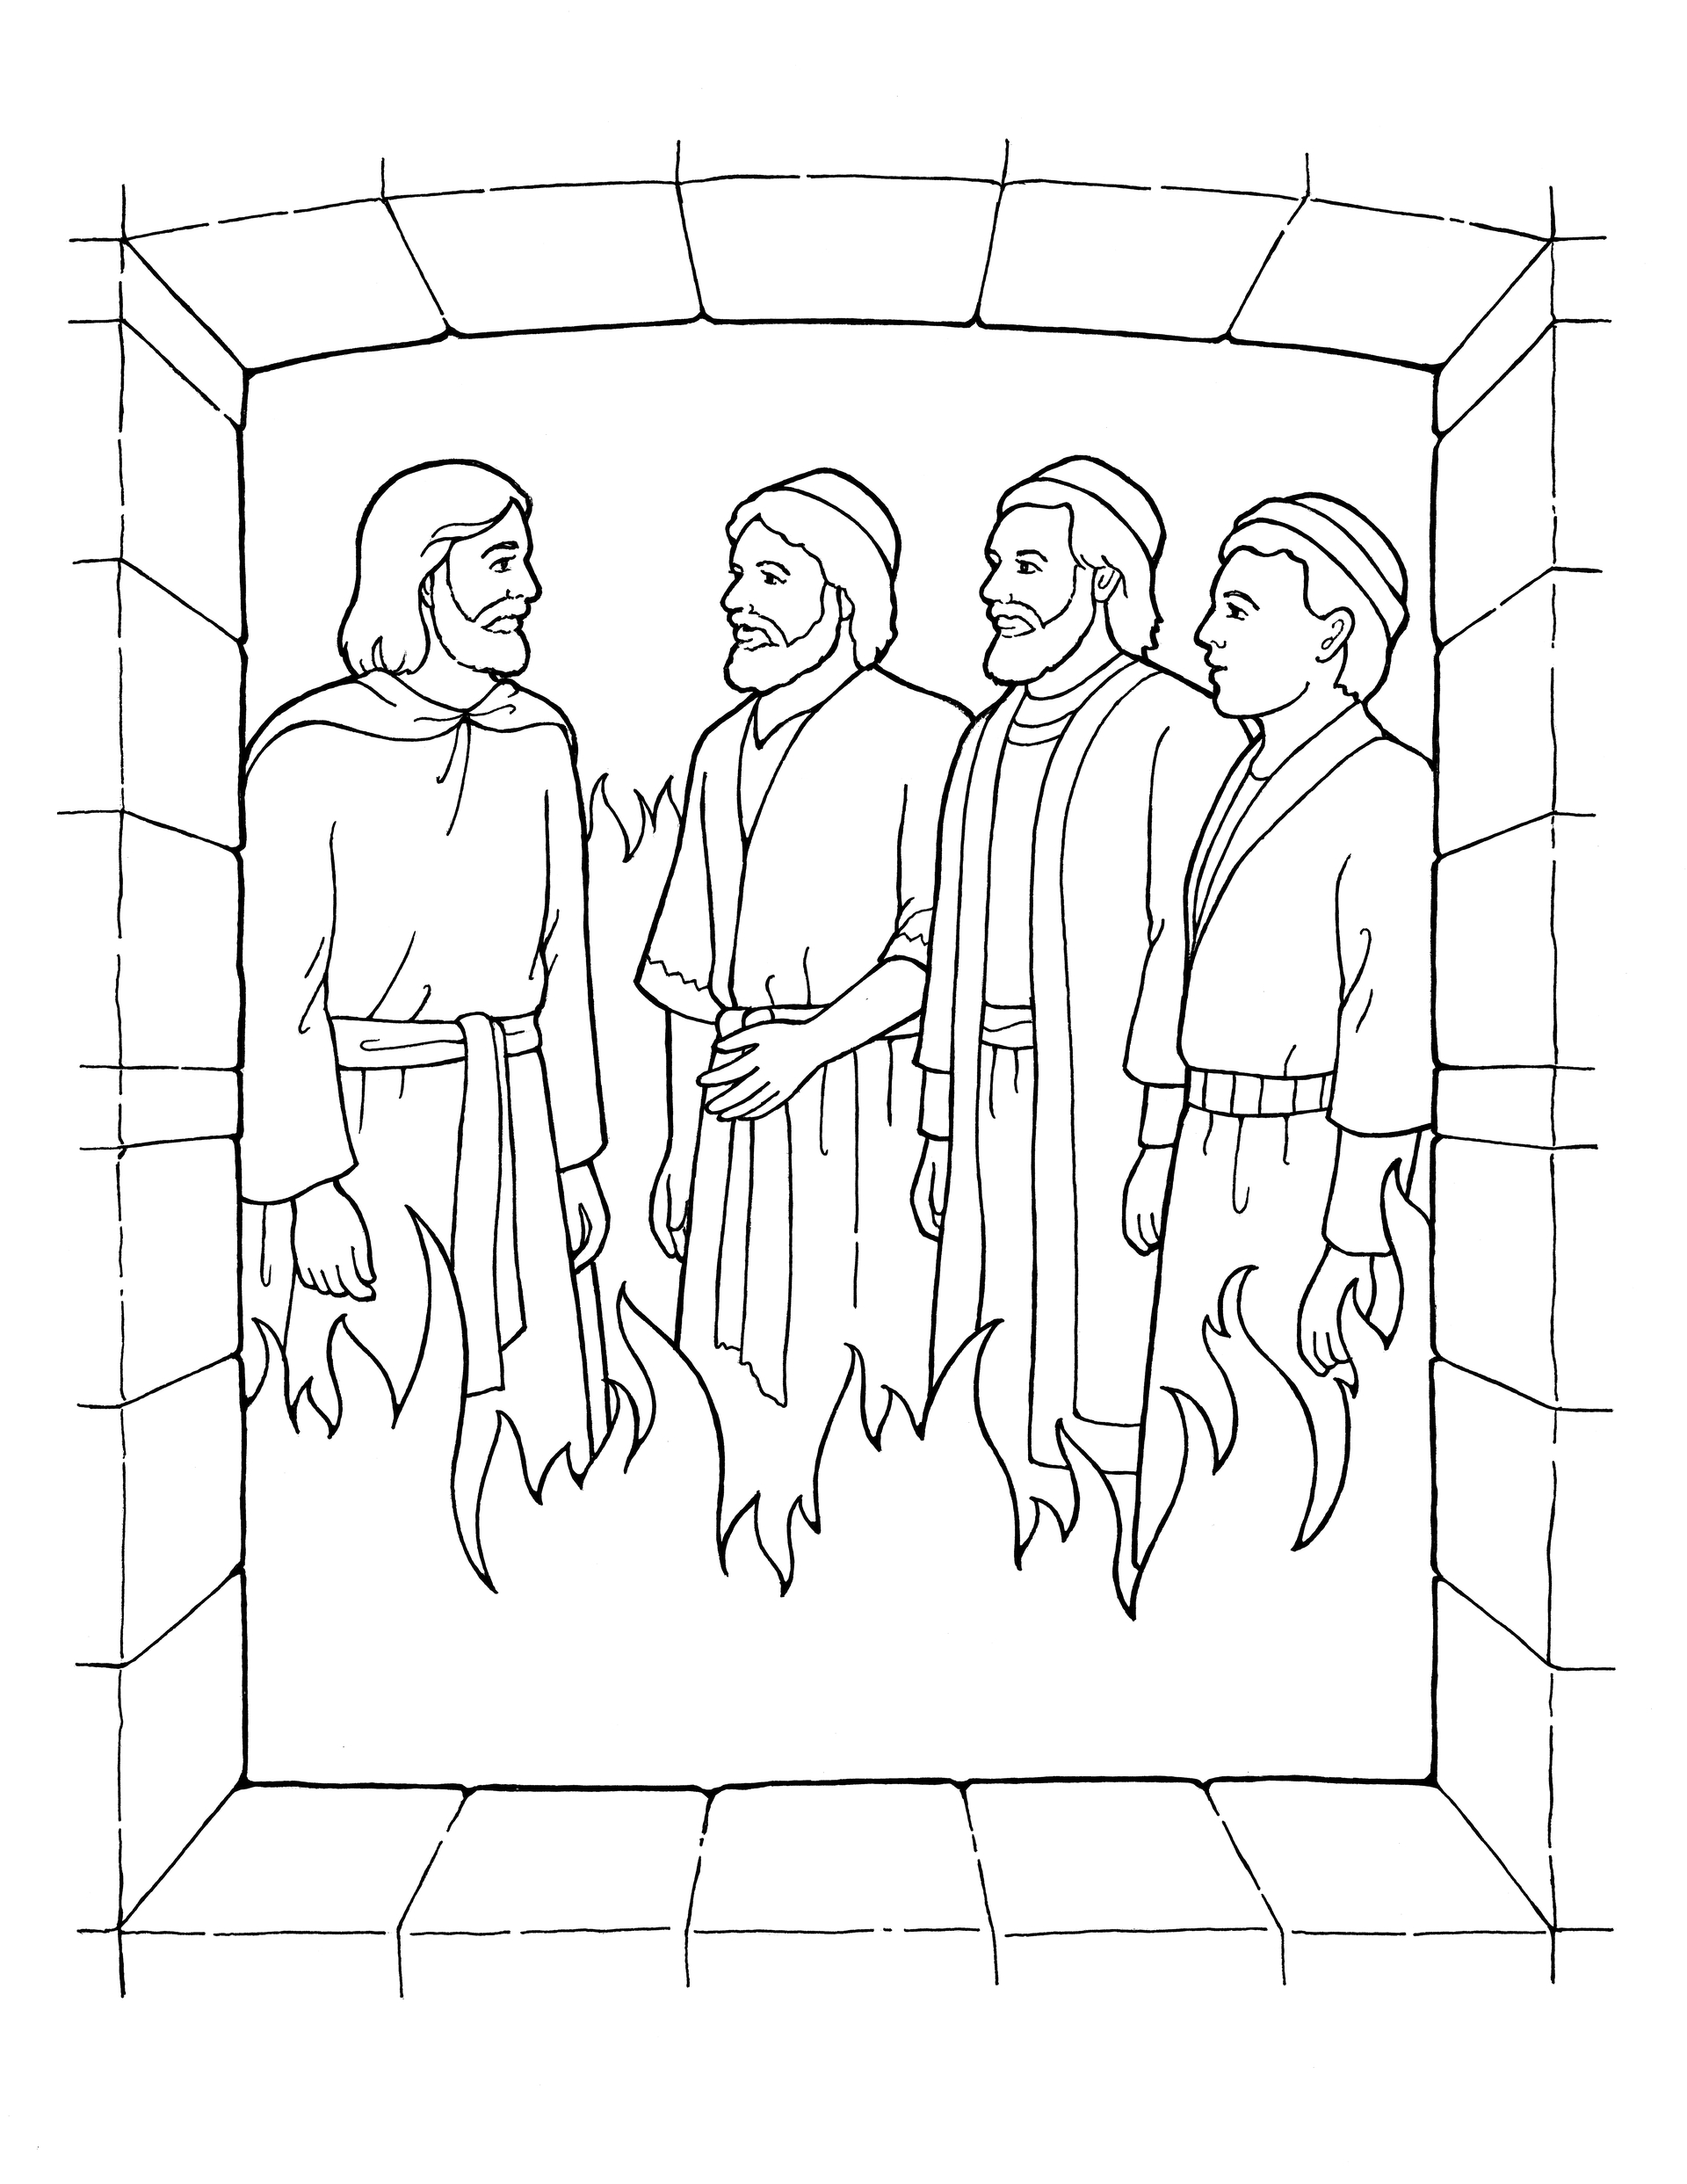 coloring-pages-shadrach-meshach-and-abednego-peoples-shadrach